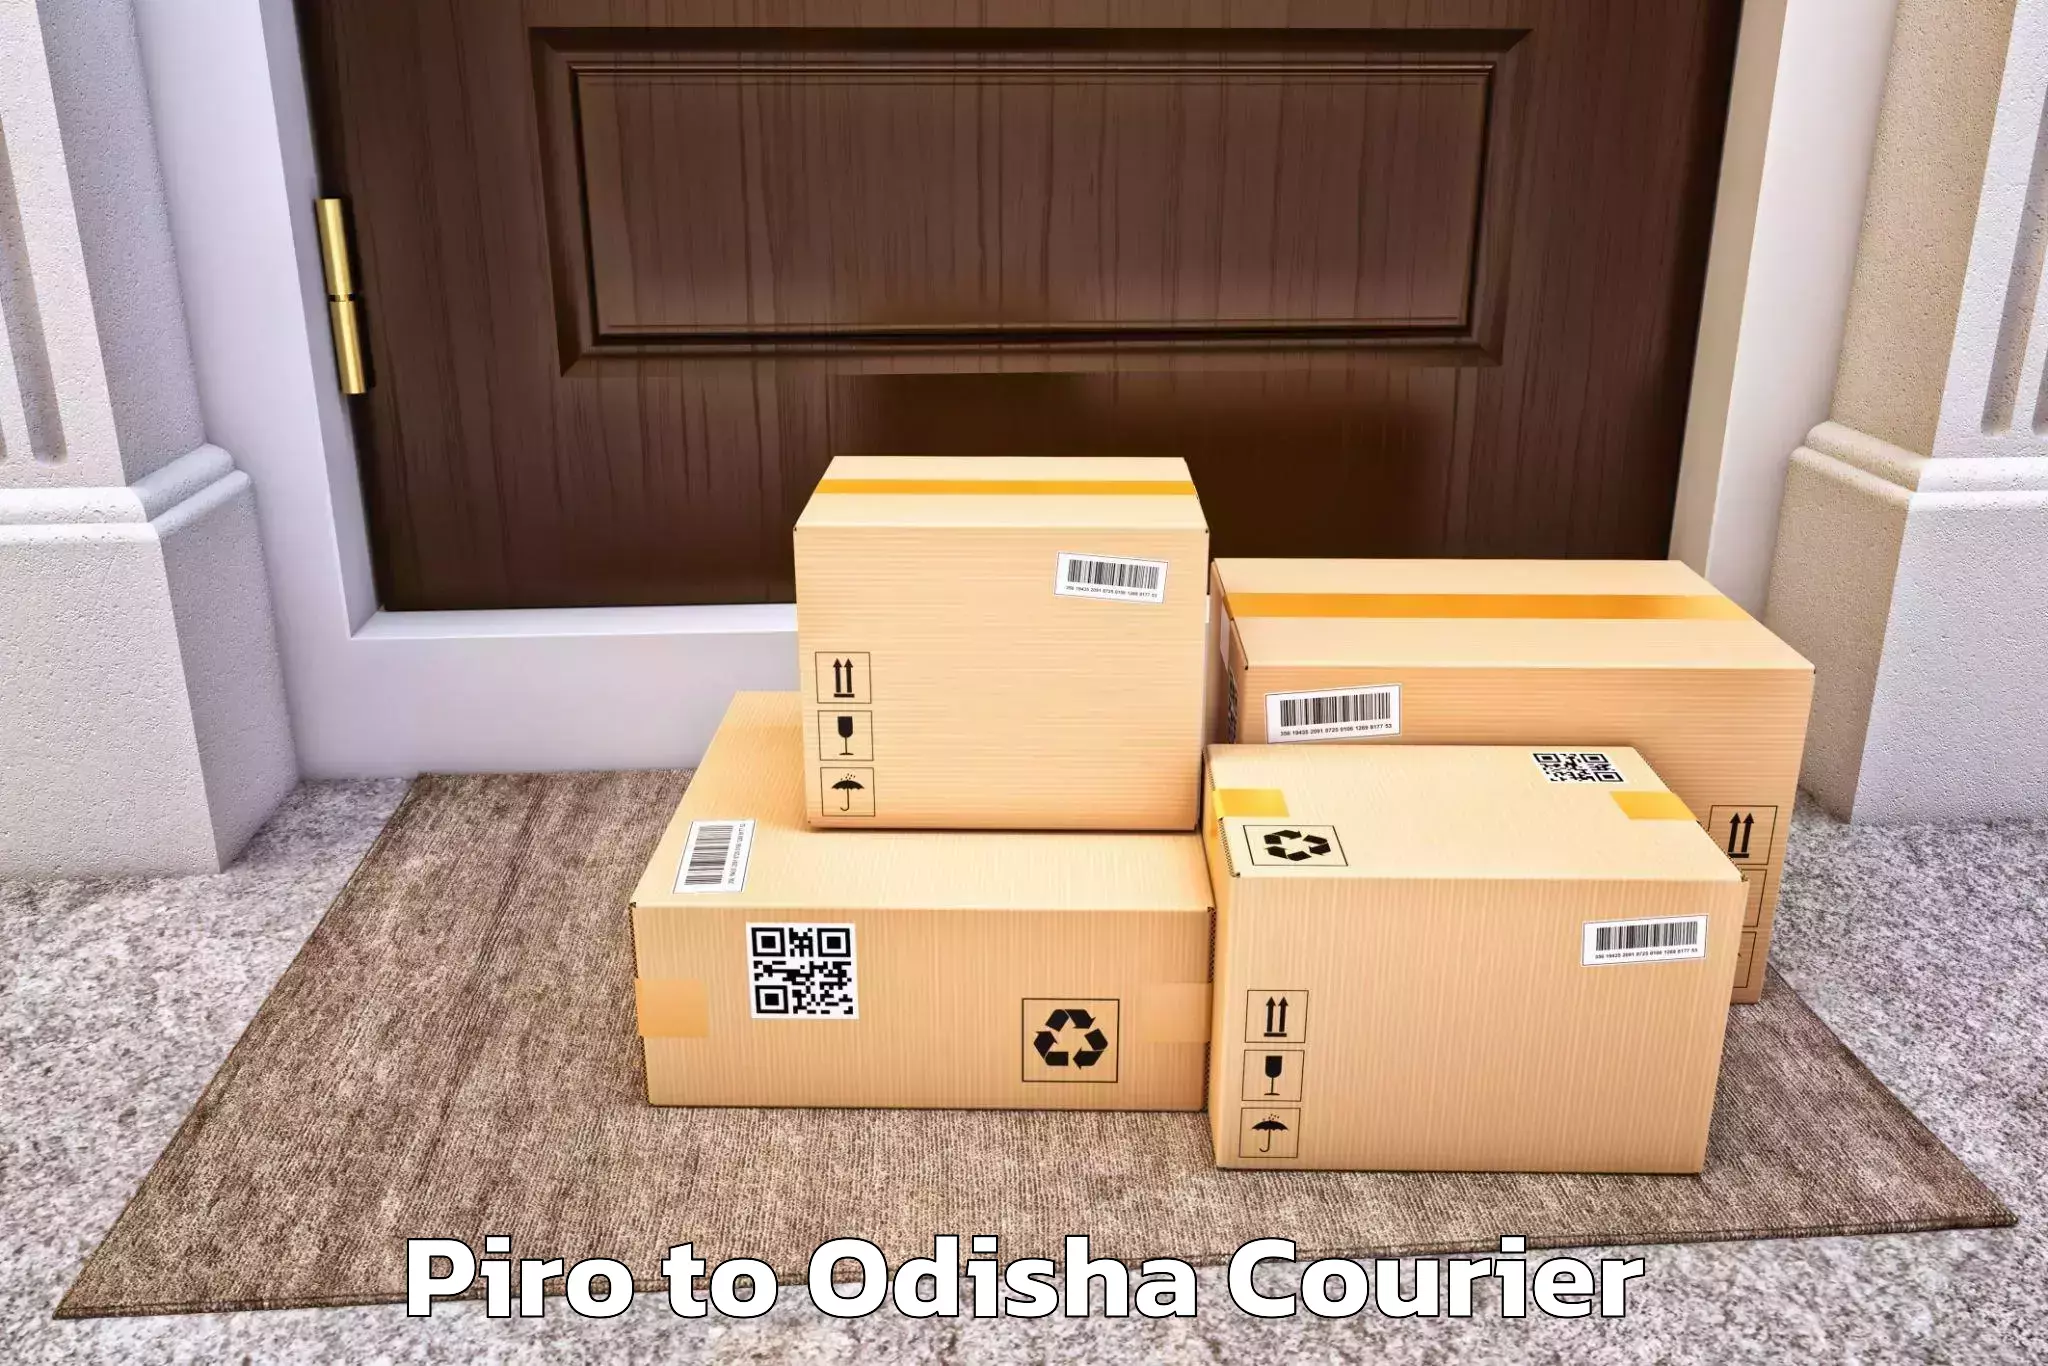 Residential moving experts Piro to Odisha